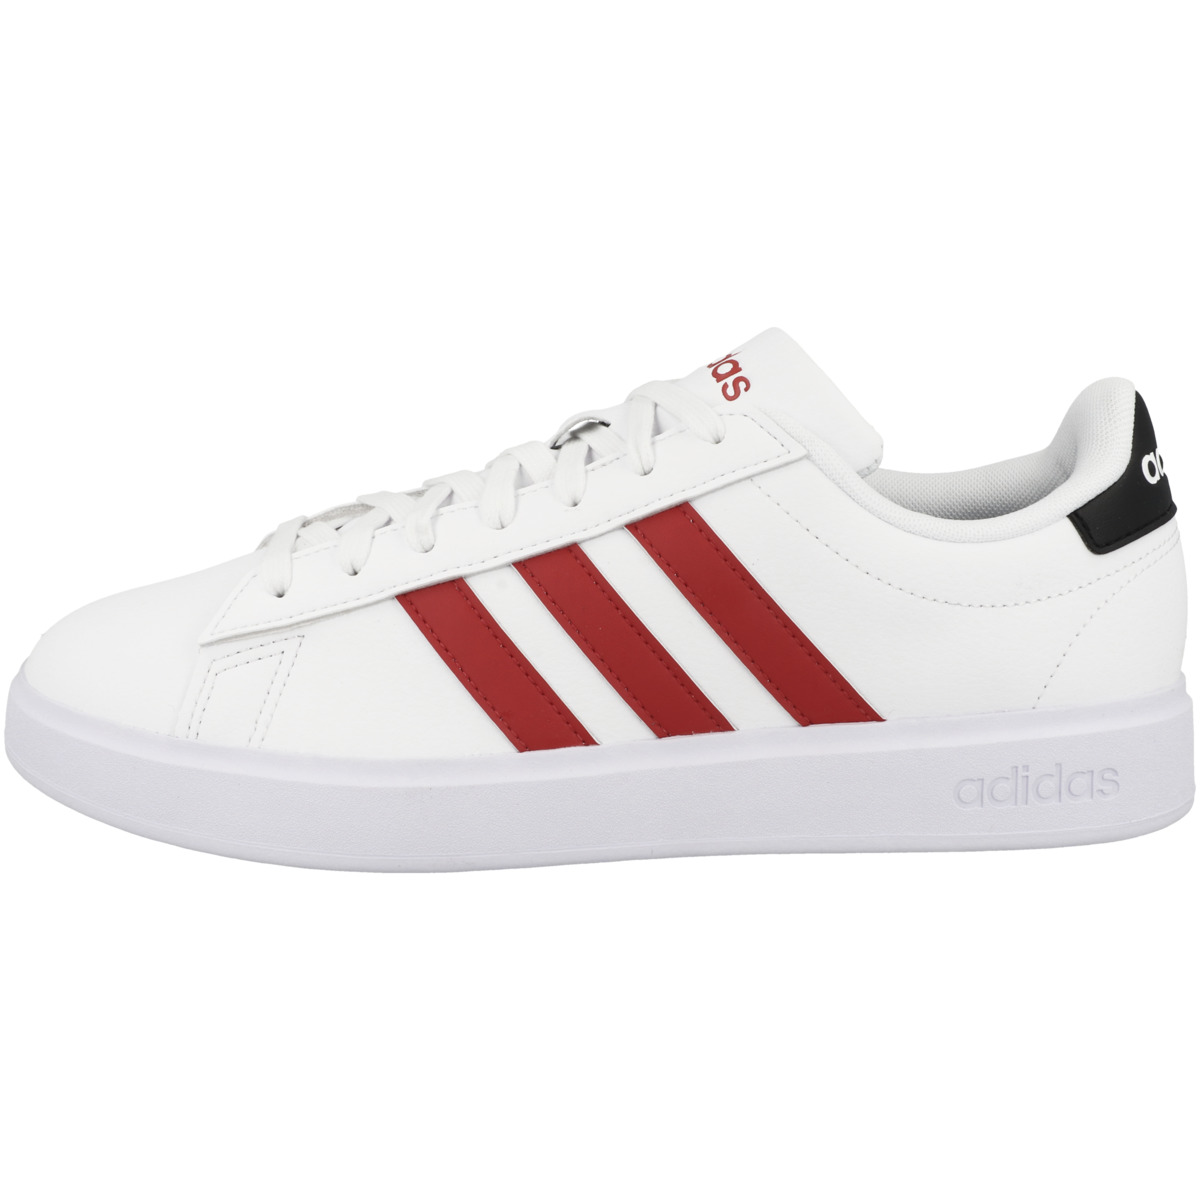 Adidas Grand Court 2.0 Sneaker low